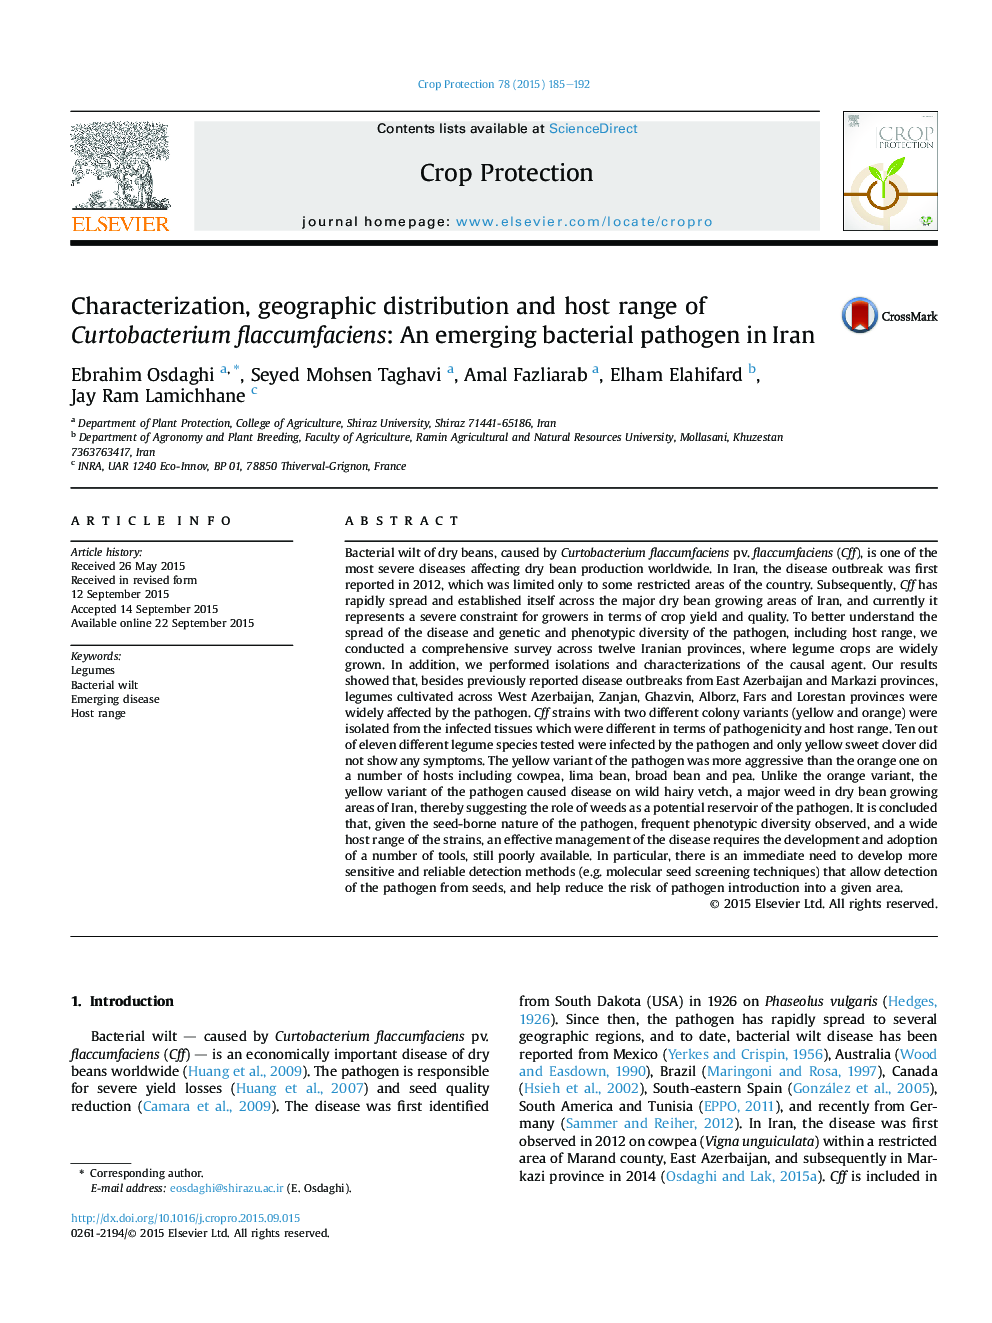 Characterization, geographic distribution and host range of Curtobacterium flaccumfaciens: An emerging bacterial pathogen in Iran